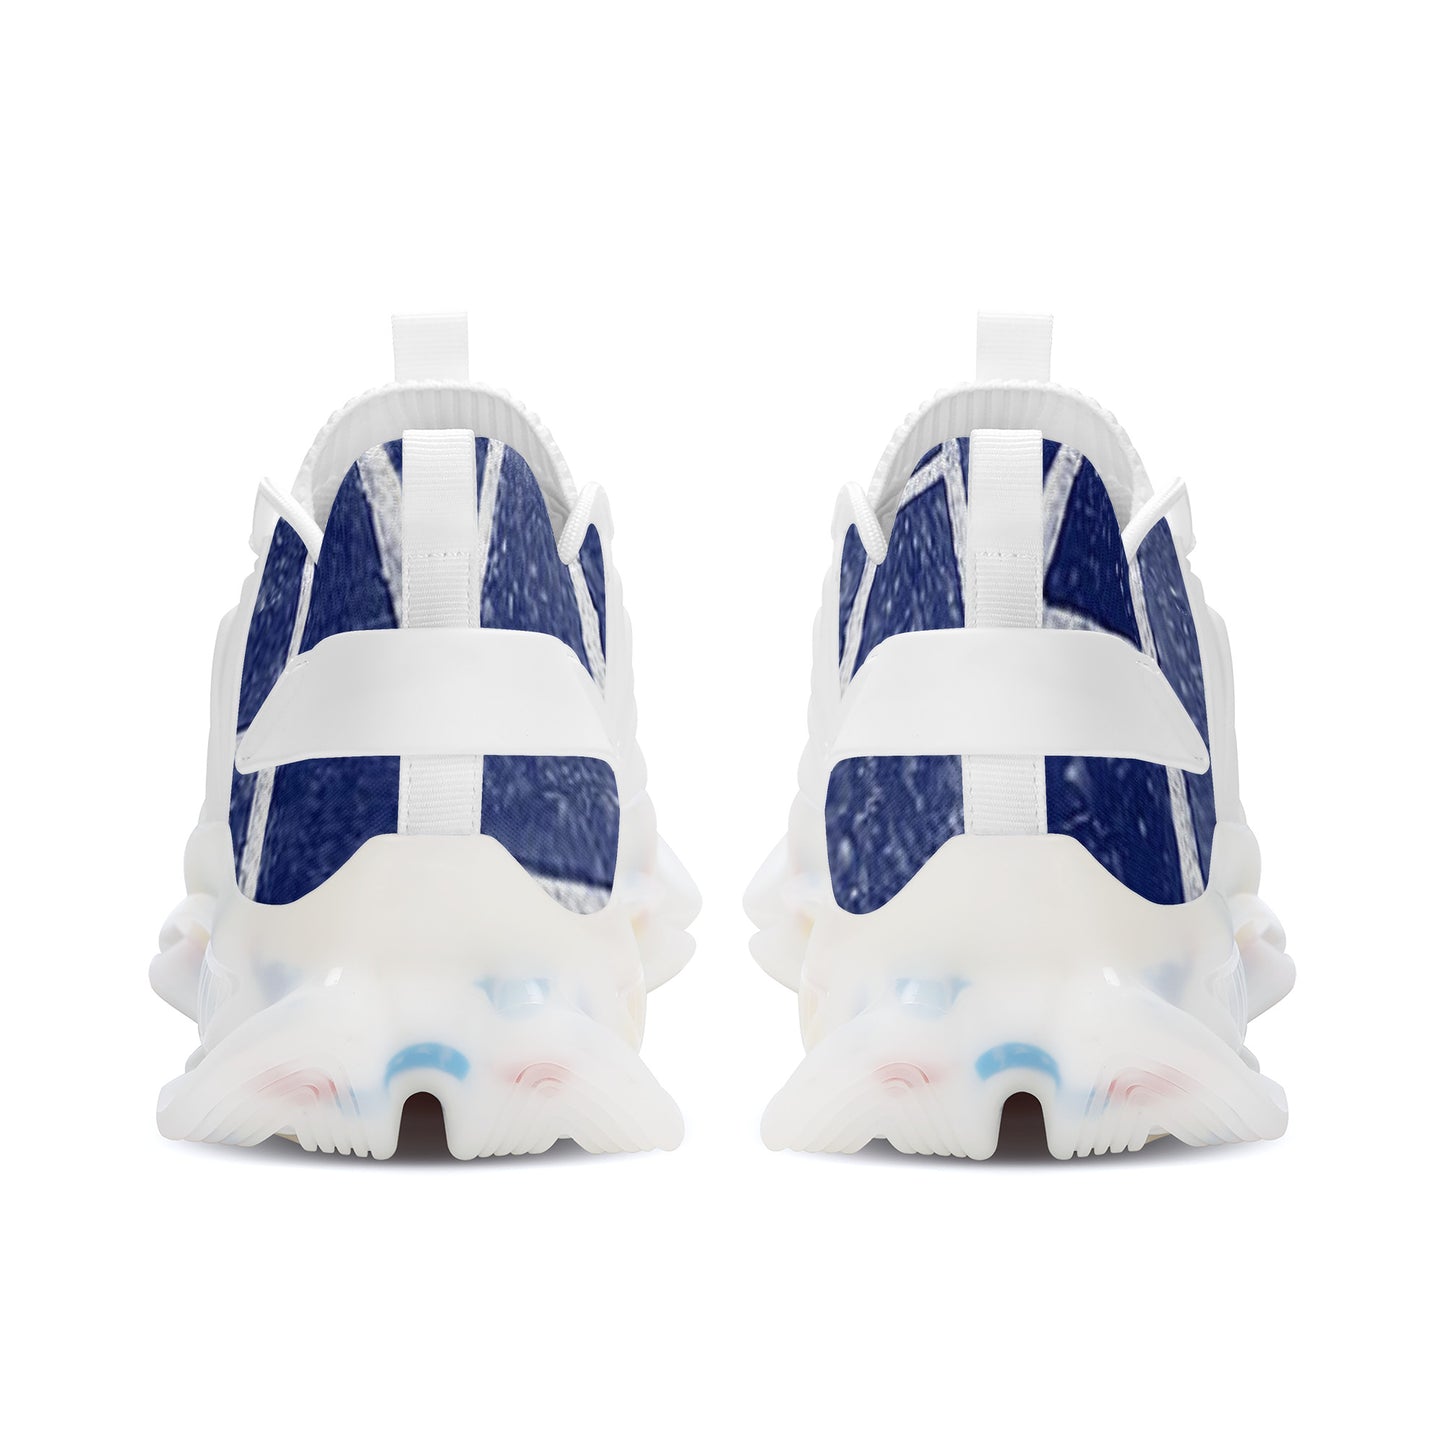 Air Max React Sneakers - White/Navy